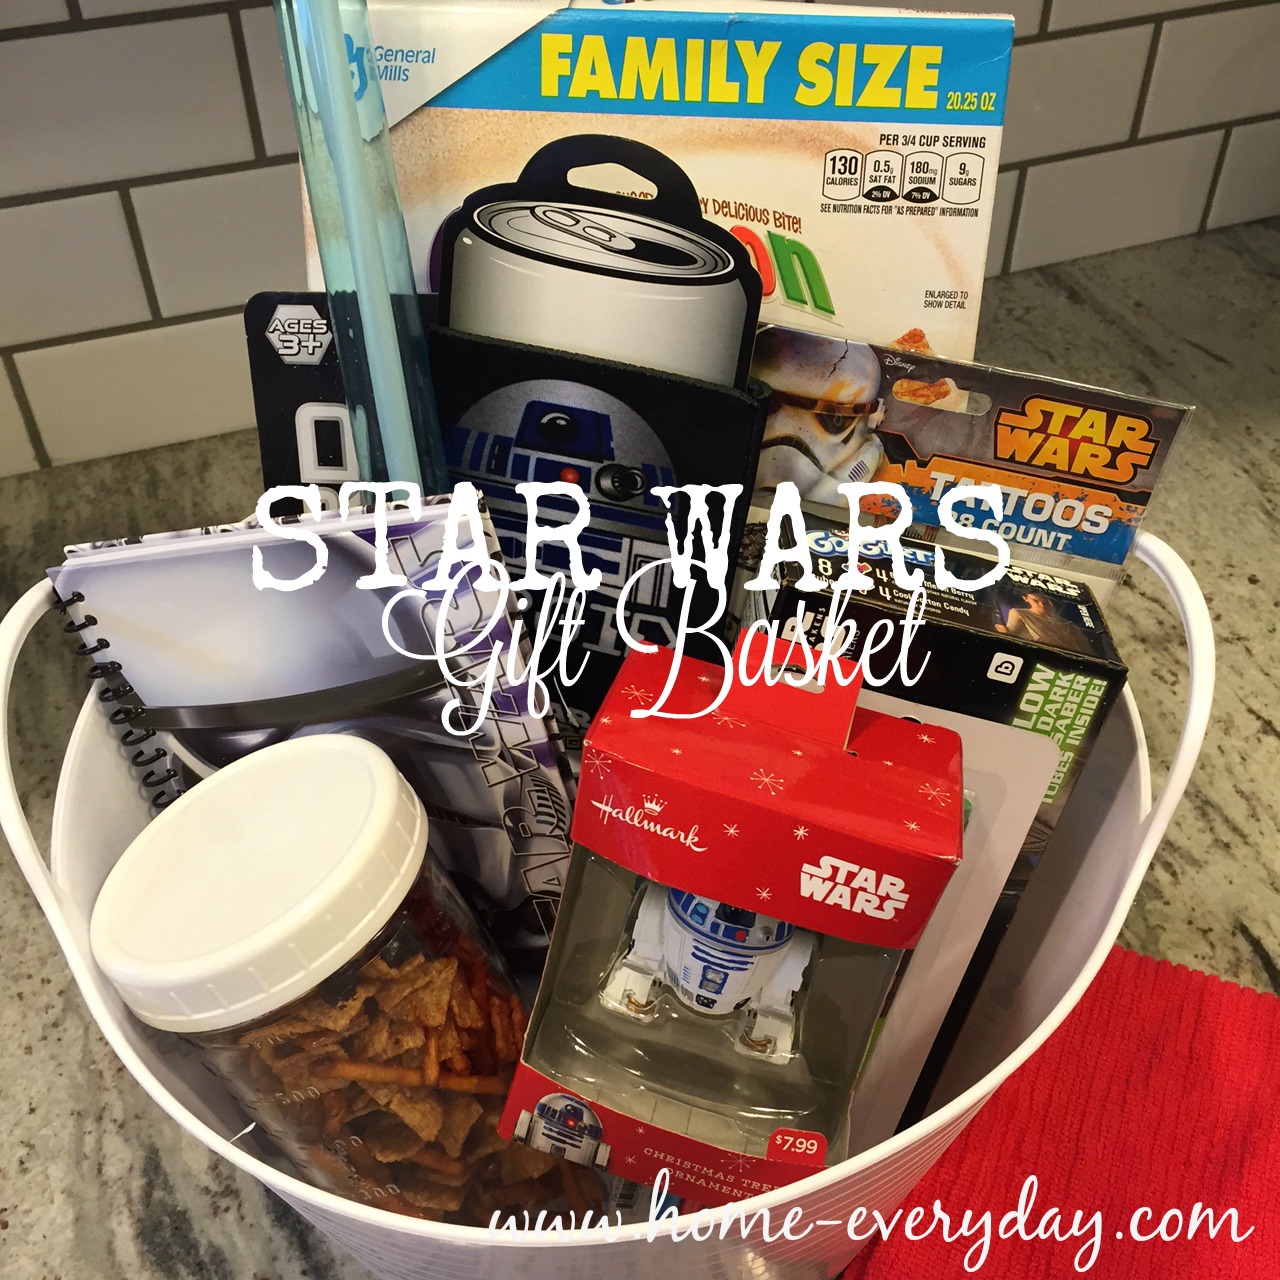 http://www.home-everyday.com/wp-content/uploads/2015/12/Star-Wars-Gift-Basket-and-Snack-Mix-3.jpg